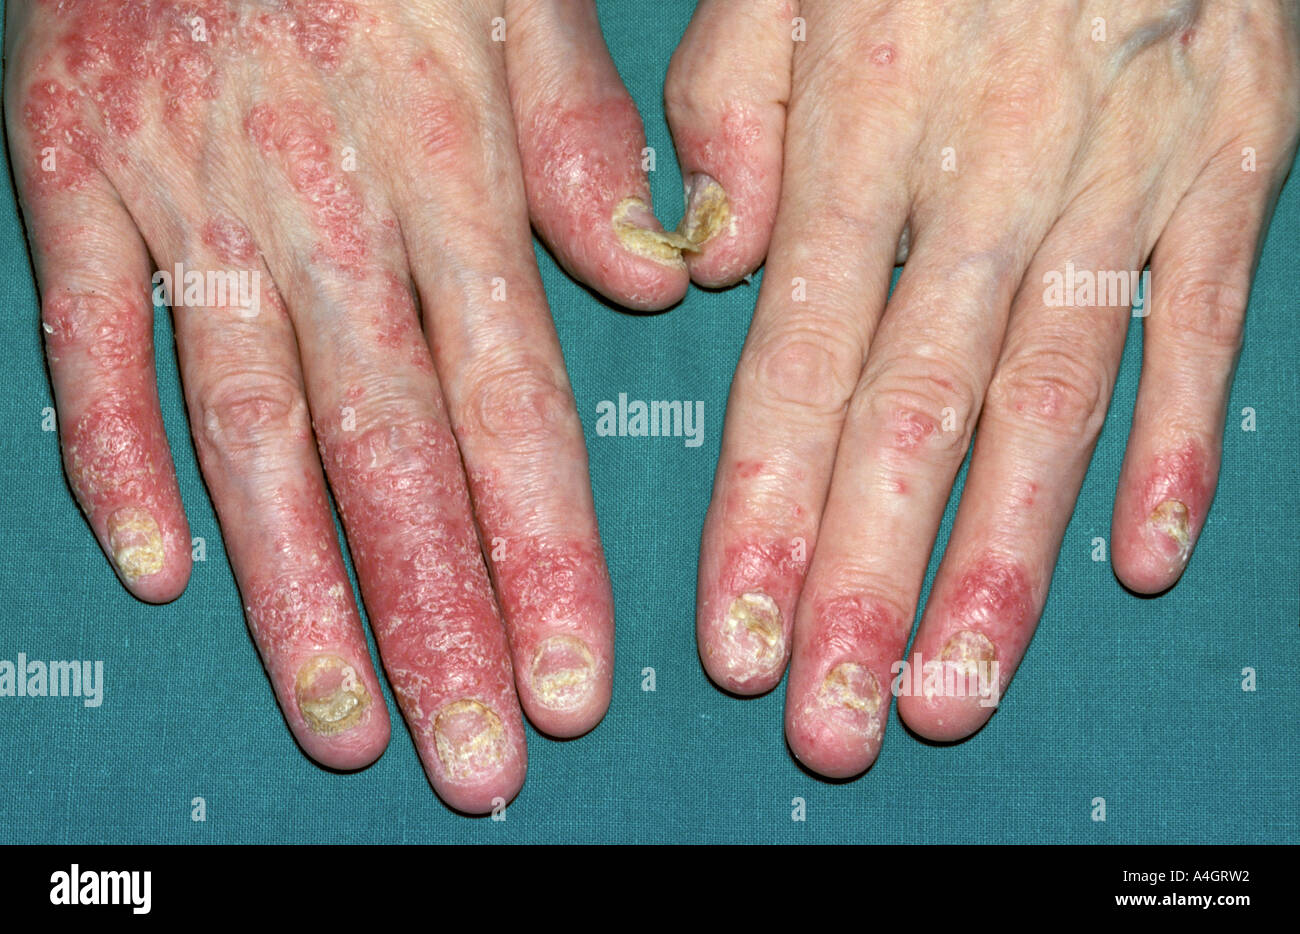 Psoriatic arthritis is a condition that causes swelling and pain in ...